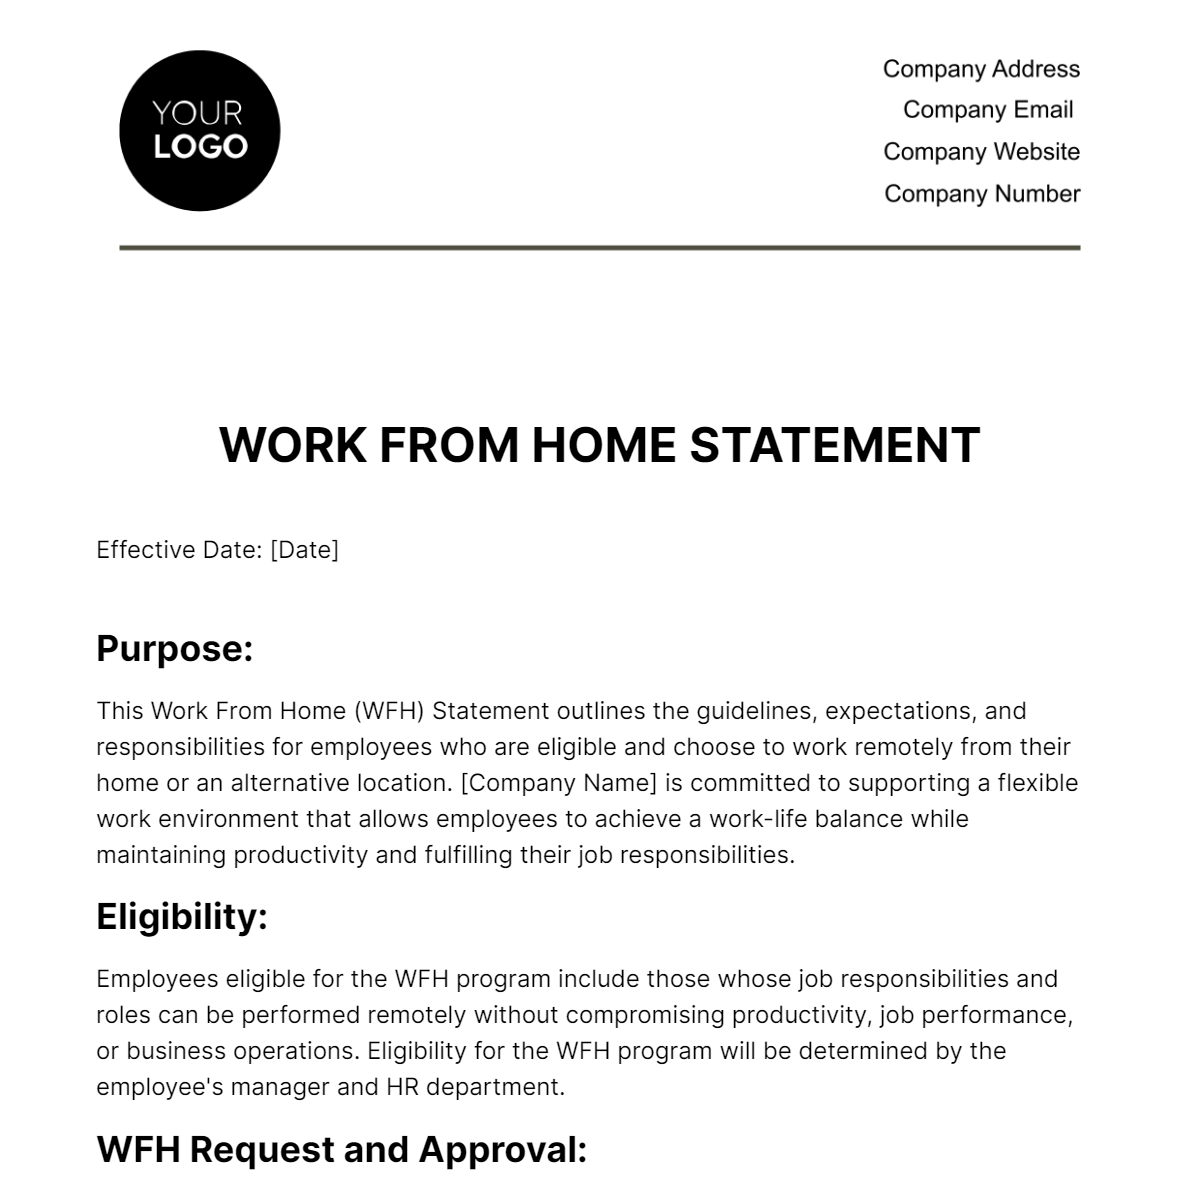 Work From Home Statement HR Template